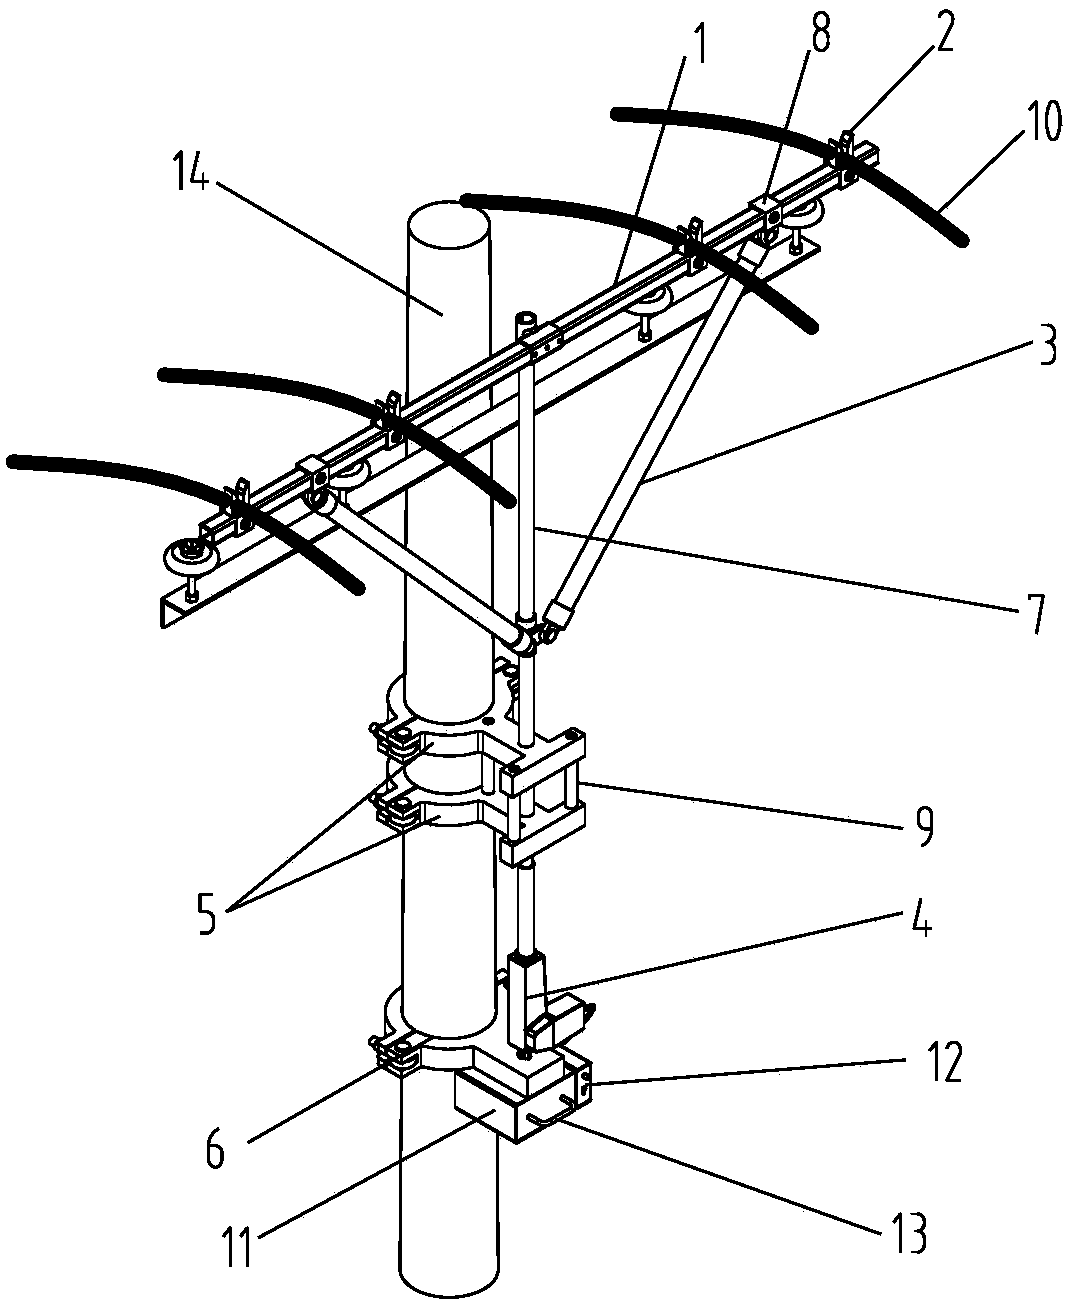 Method for changing strain power pole of linear rod with loads